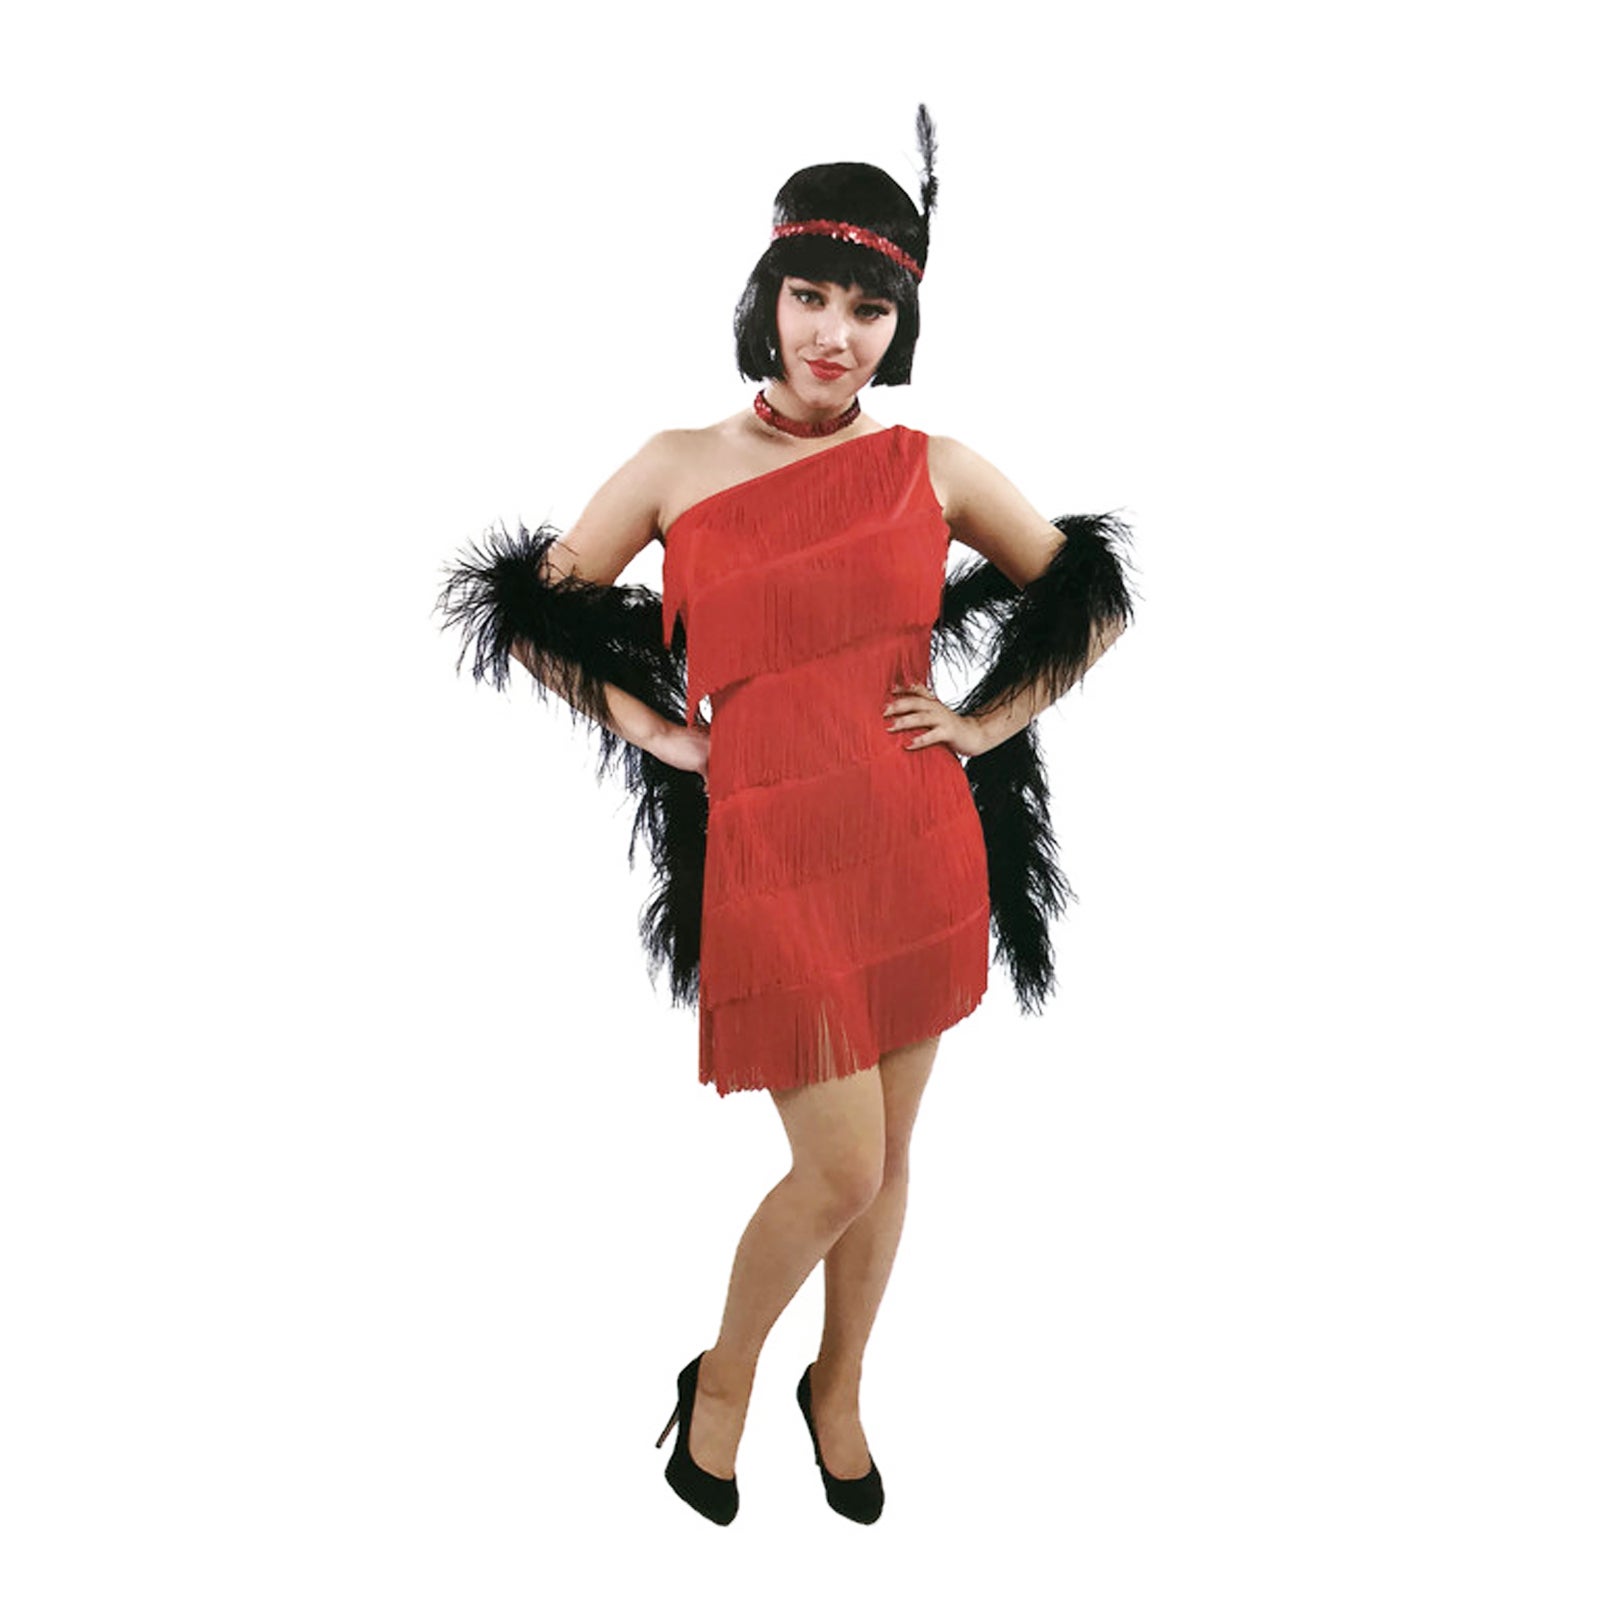 Ladies Flapper Costume Charleston Gatsby Chicago Fancy Dress Party 1920s 20s - Red